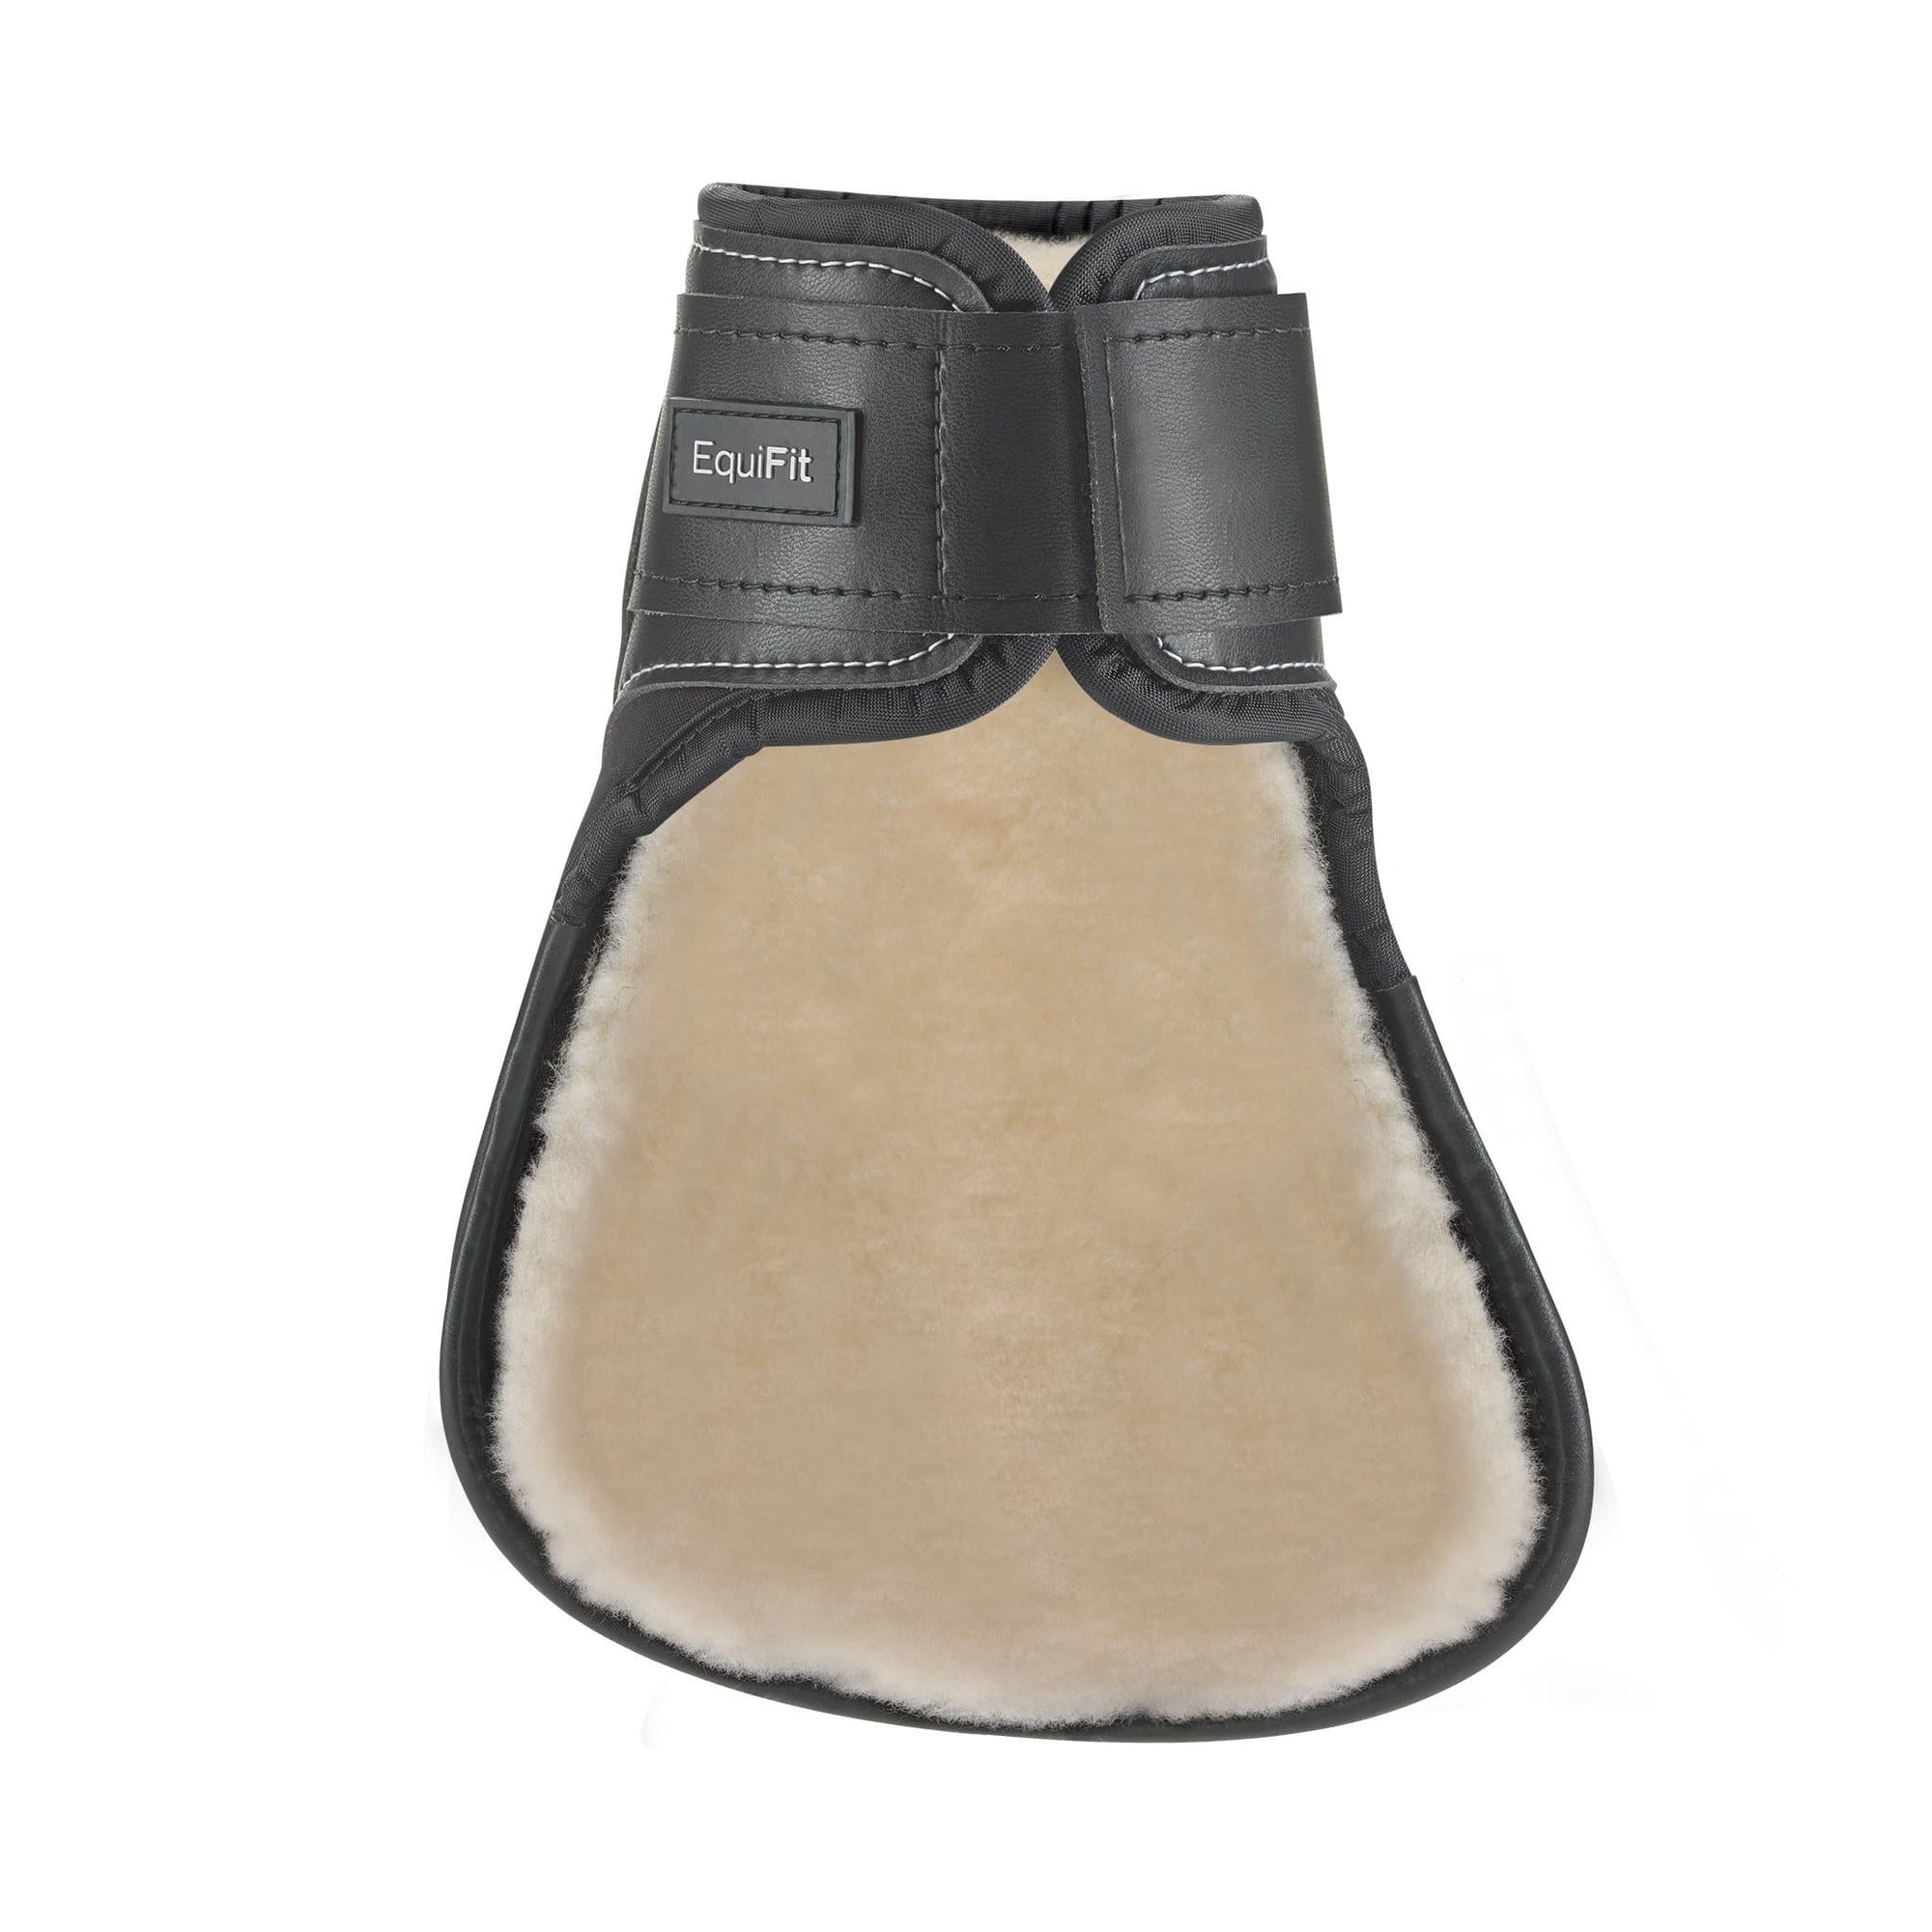 Young Horse Hind Boot w/ Extended SheepsWool ImpacTeq Liner has rigid strike zone protection, which provides the most comprehensive coverage